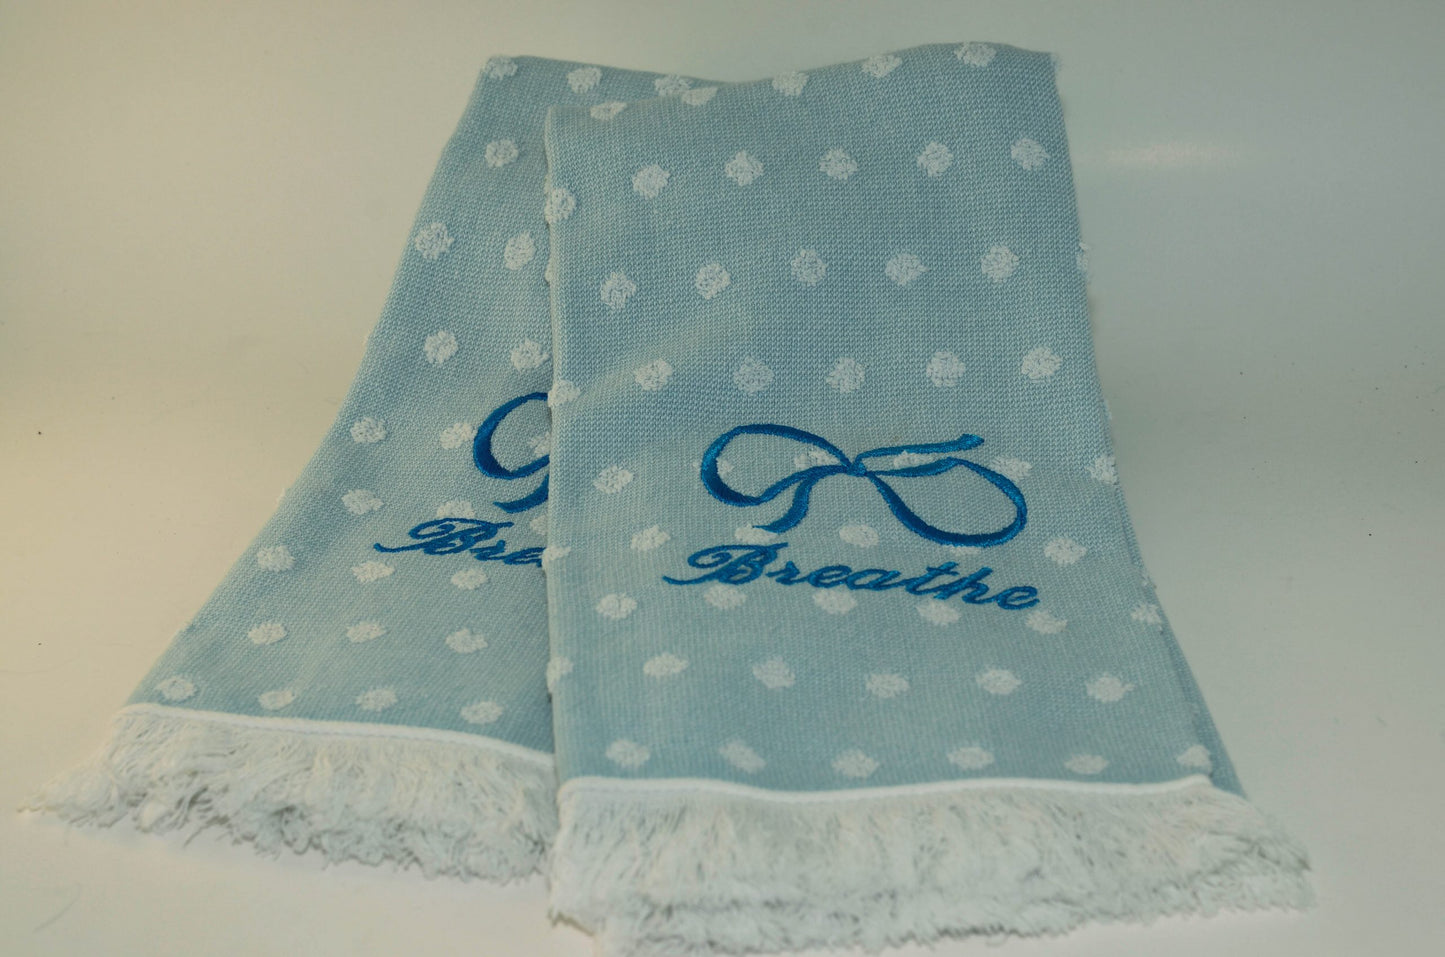 Pair of Hand Towels, Breathe, by Christine Hartman